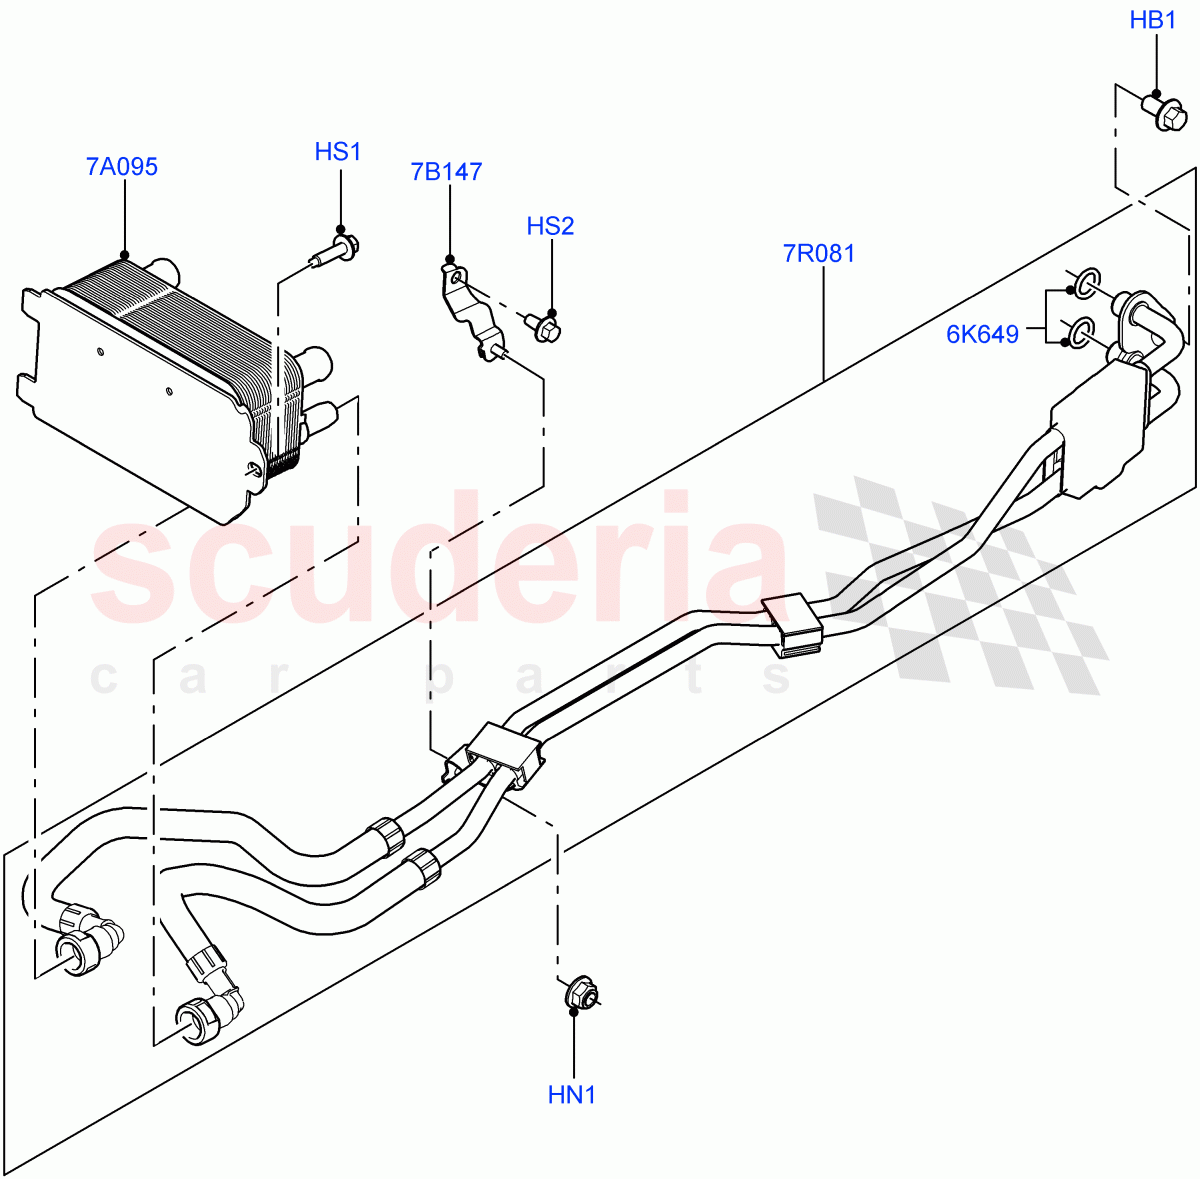 Transmission Cooling Systems(4.4L DOHC DITC V8 Diesel,8 Speed Auto Trans ZF 8HP76)((V)FROMKA000001) of Land Rover Land Rover Range Rover Sport (2014+) [3.0 I6 Turbo Diesel AJ20D6]